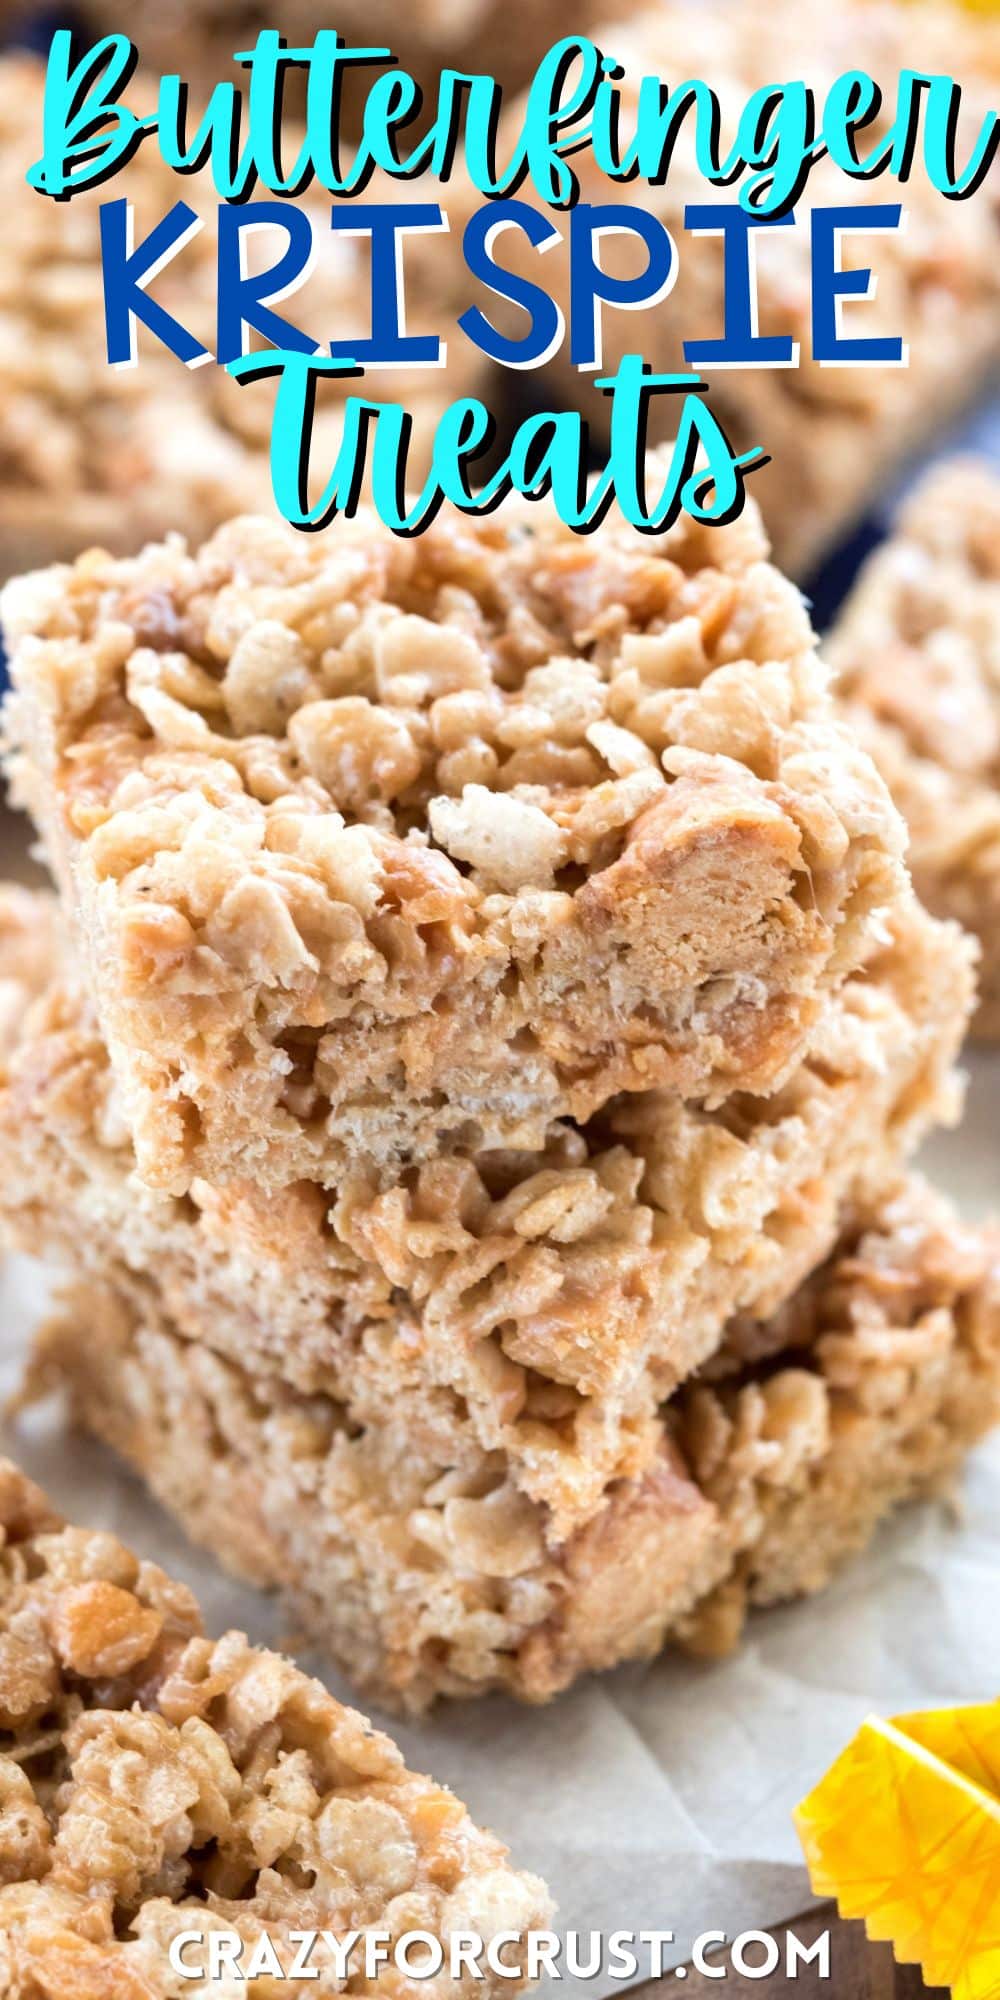 stacked Rice Krispie treats with butterfingers spread around with words on the image.